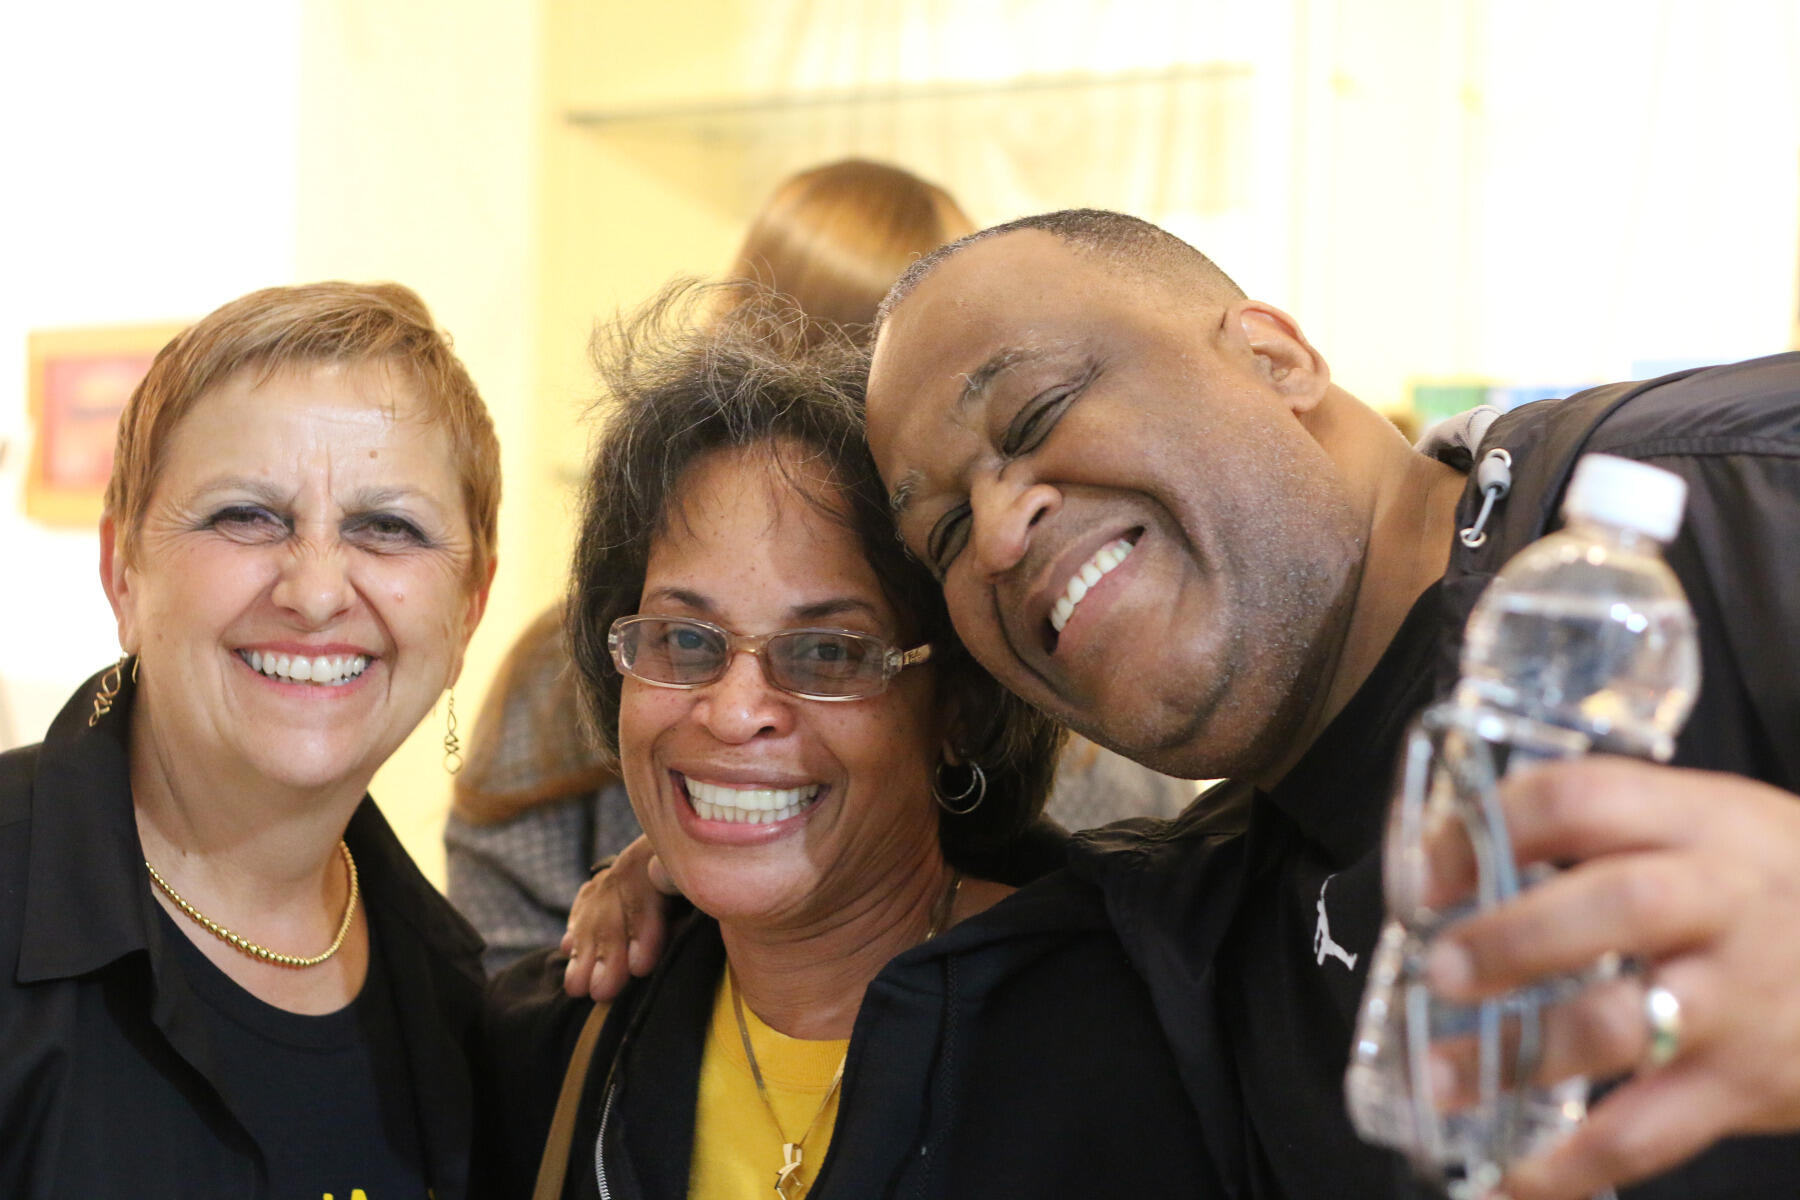 (from left to right) Cathy Saunders, Linda Brown-Burton and Lance Burton celebrate the VCU Department of Gerontology’s 40th anniversary. “I continue to be interested in getting people involved in the gerontology program at VCU,” said Saunders, who graduated in 1982 and now chairs the department’s advisory board.